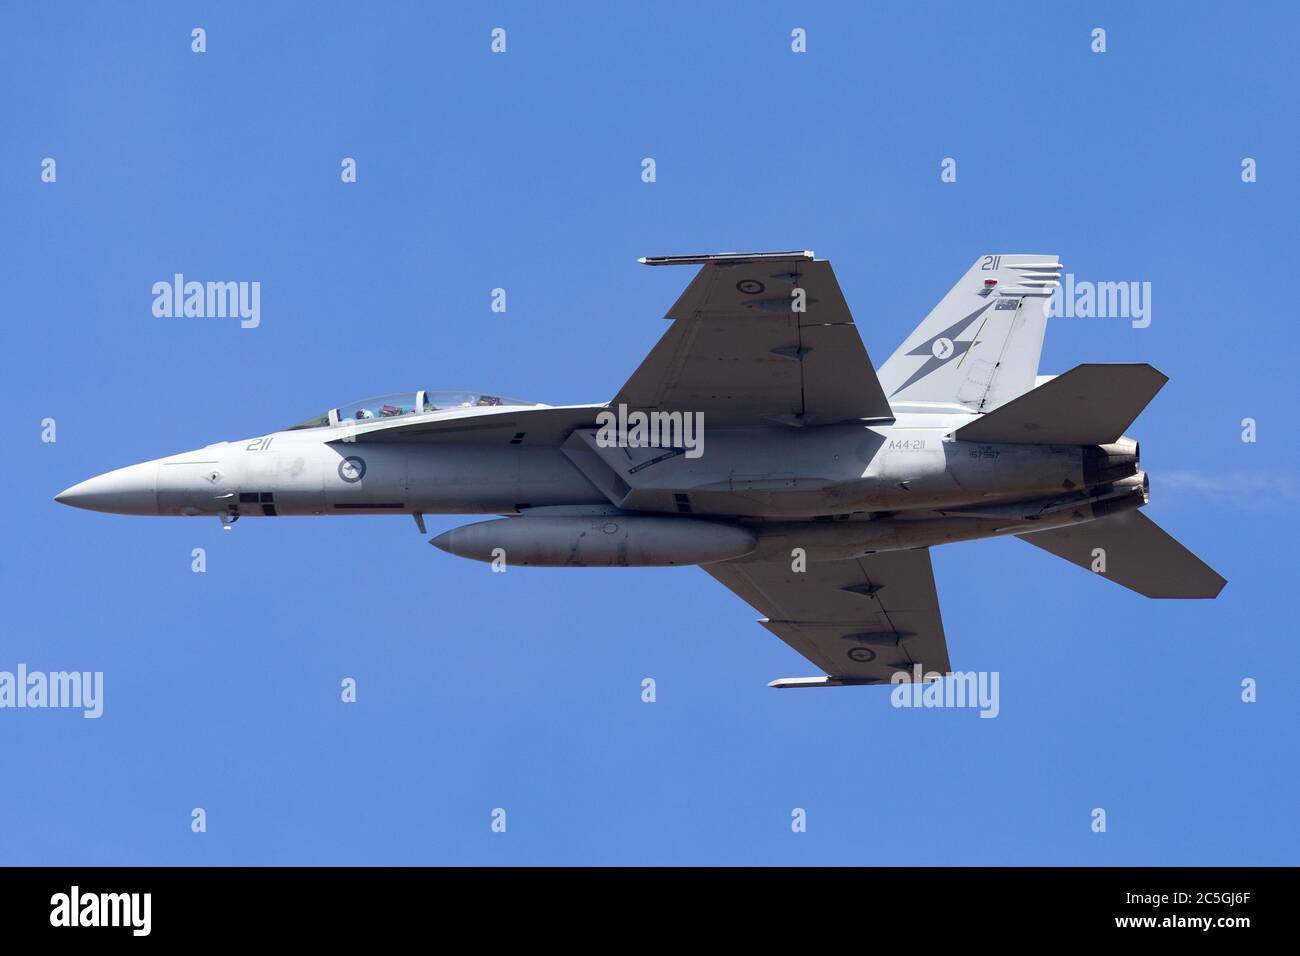 Royal Australian Air Force (RAAF) Boeing F/A-18F Super Hornet multirole fighter aircraft A44-211 from RAAF Amberley in Queensland. Stock Photo